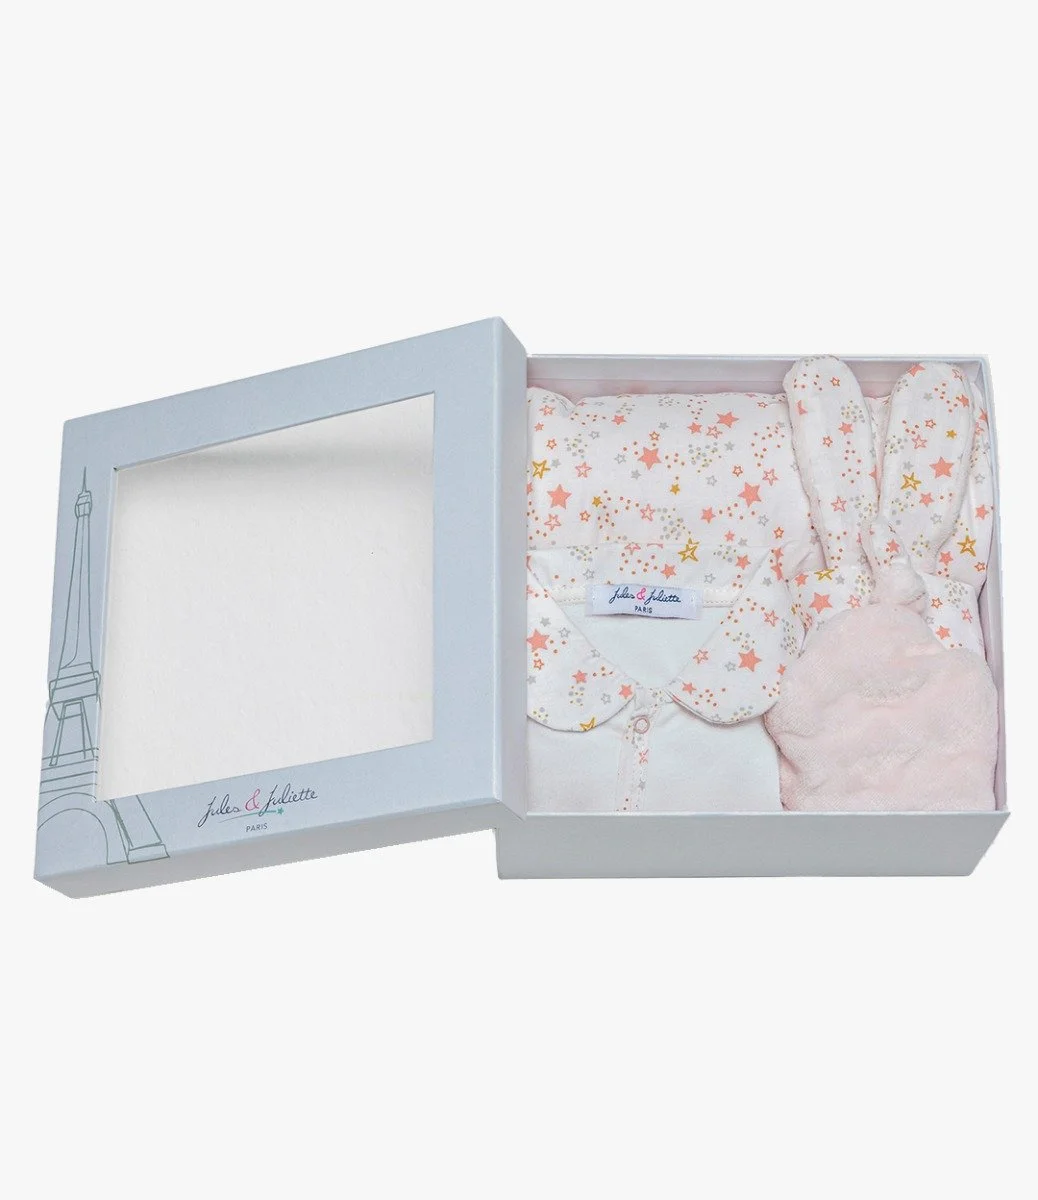 Astra Gift Set - 3 pieces by Jules & Juliette - White Floral